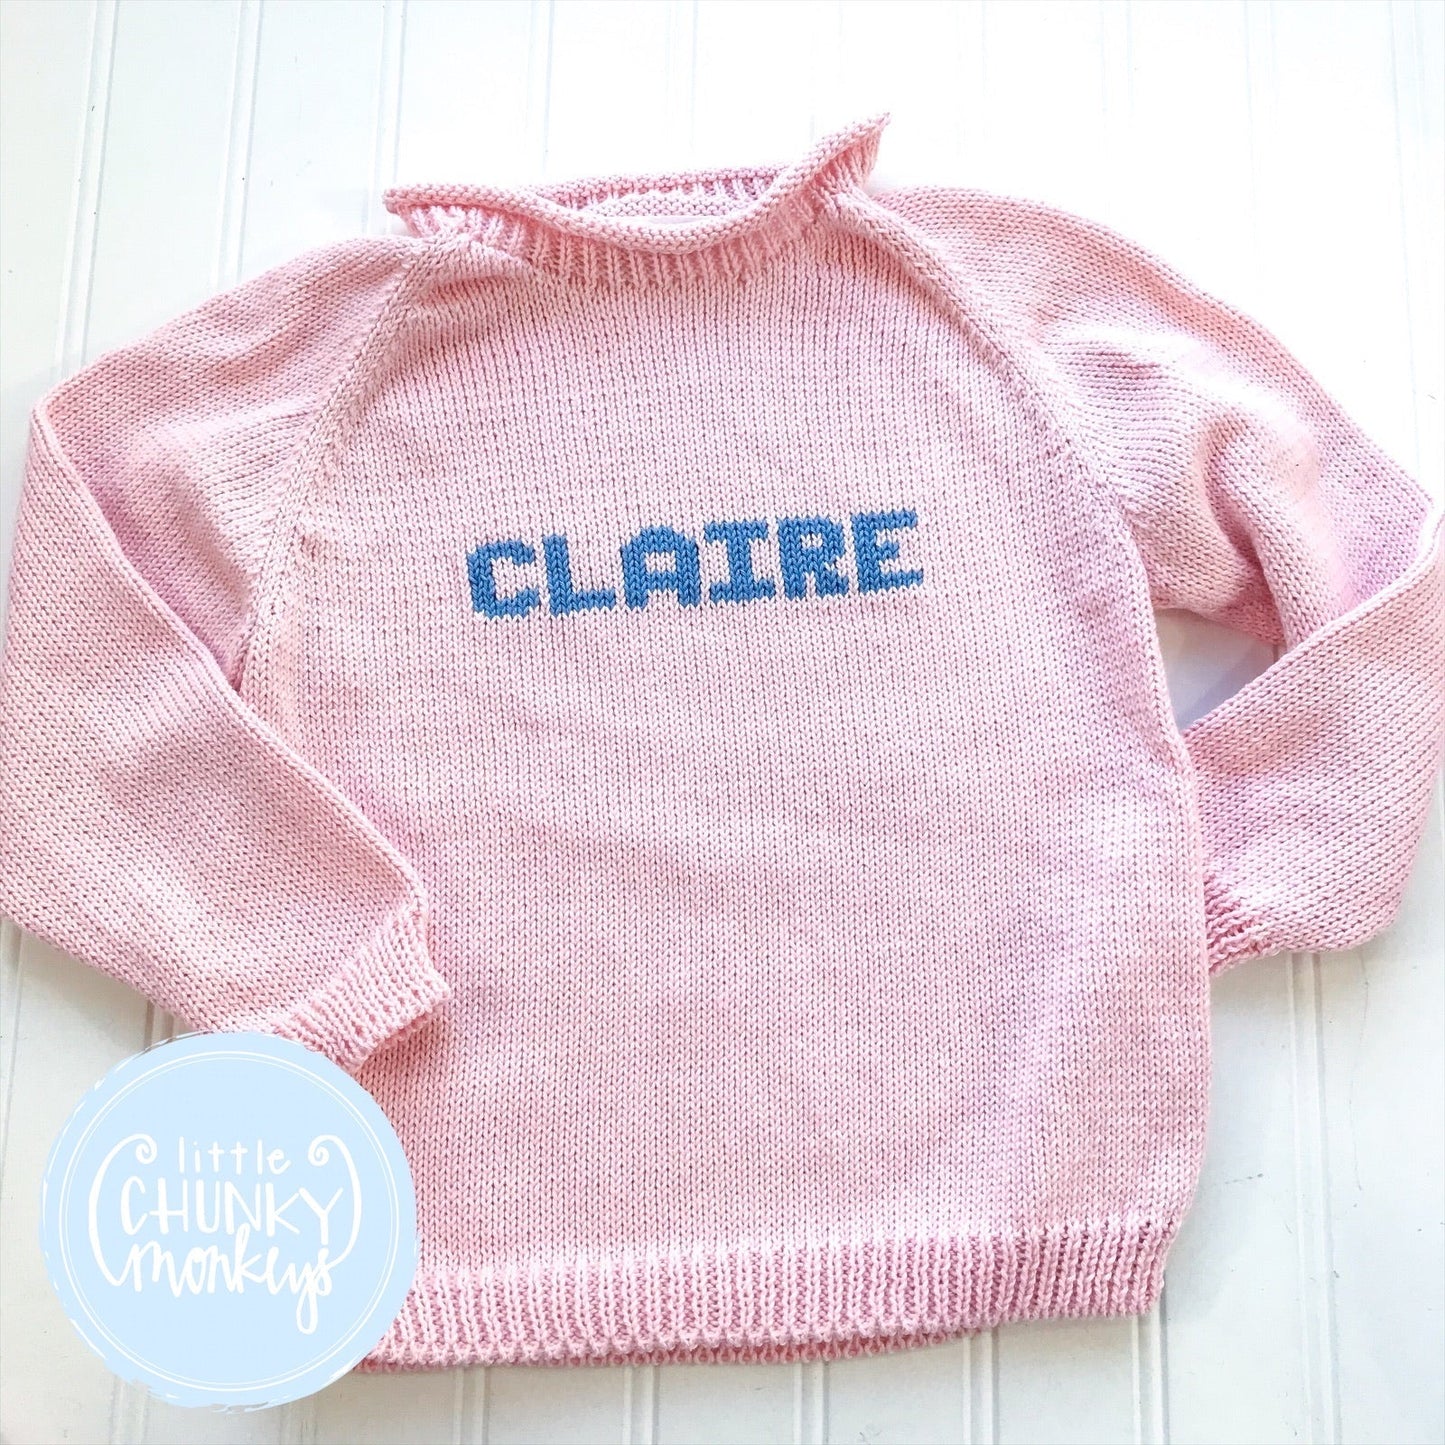 Ready to Ship - Custom Knit Name Sweater - Light Pink & Denim Blue "CLAIRE" - Small (2Y-4Y)